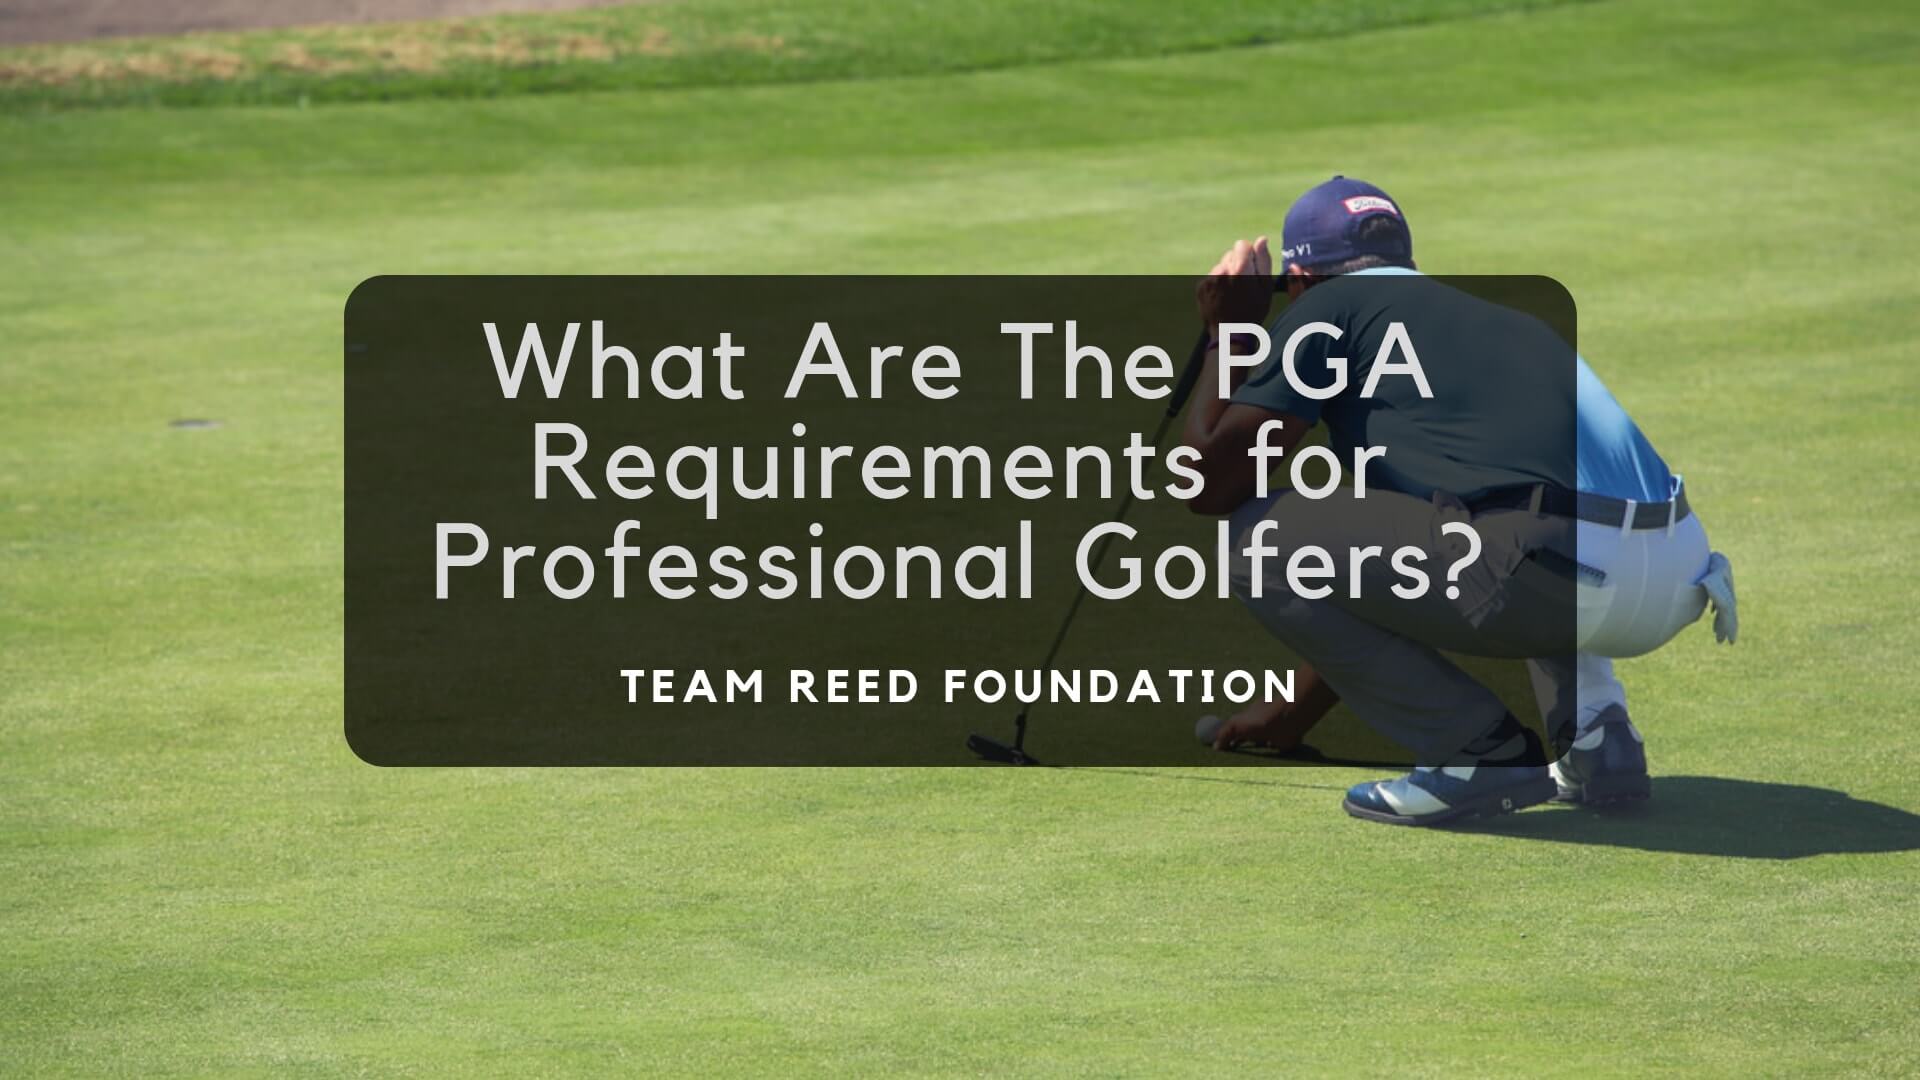 What Are The PGA Requirements for Professional Golfers, Team Reed Foundation